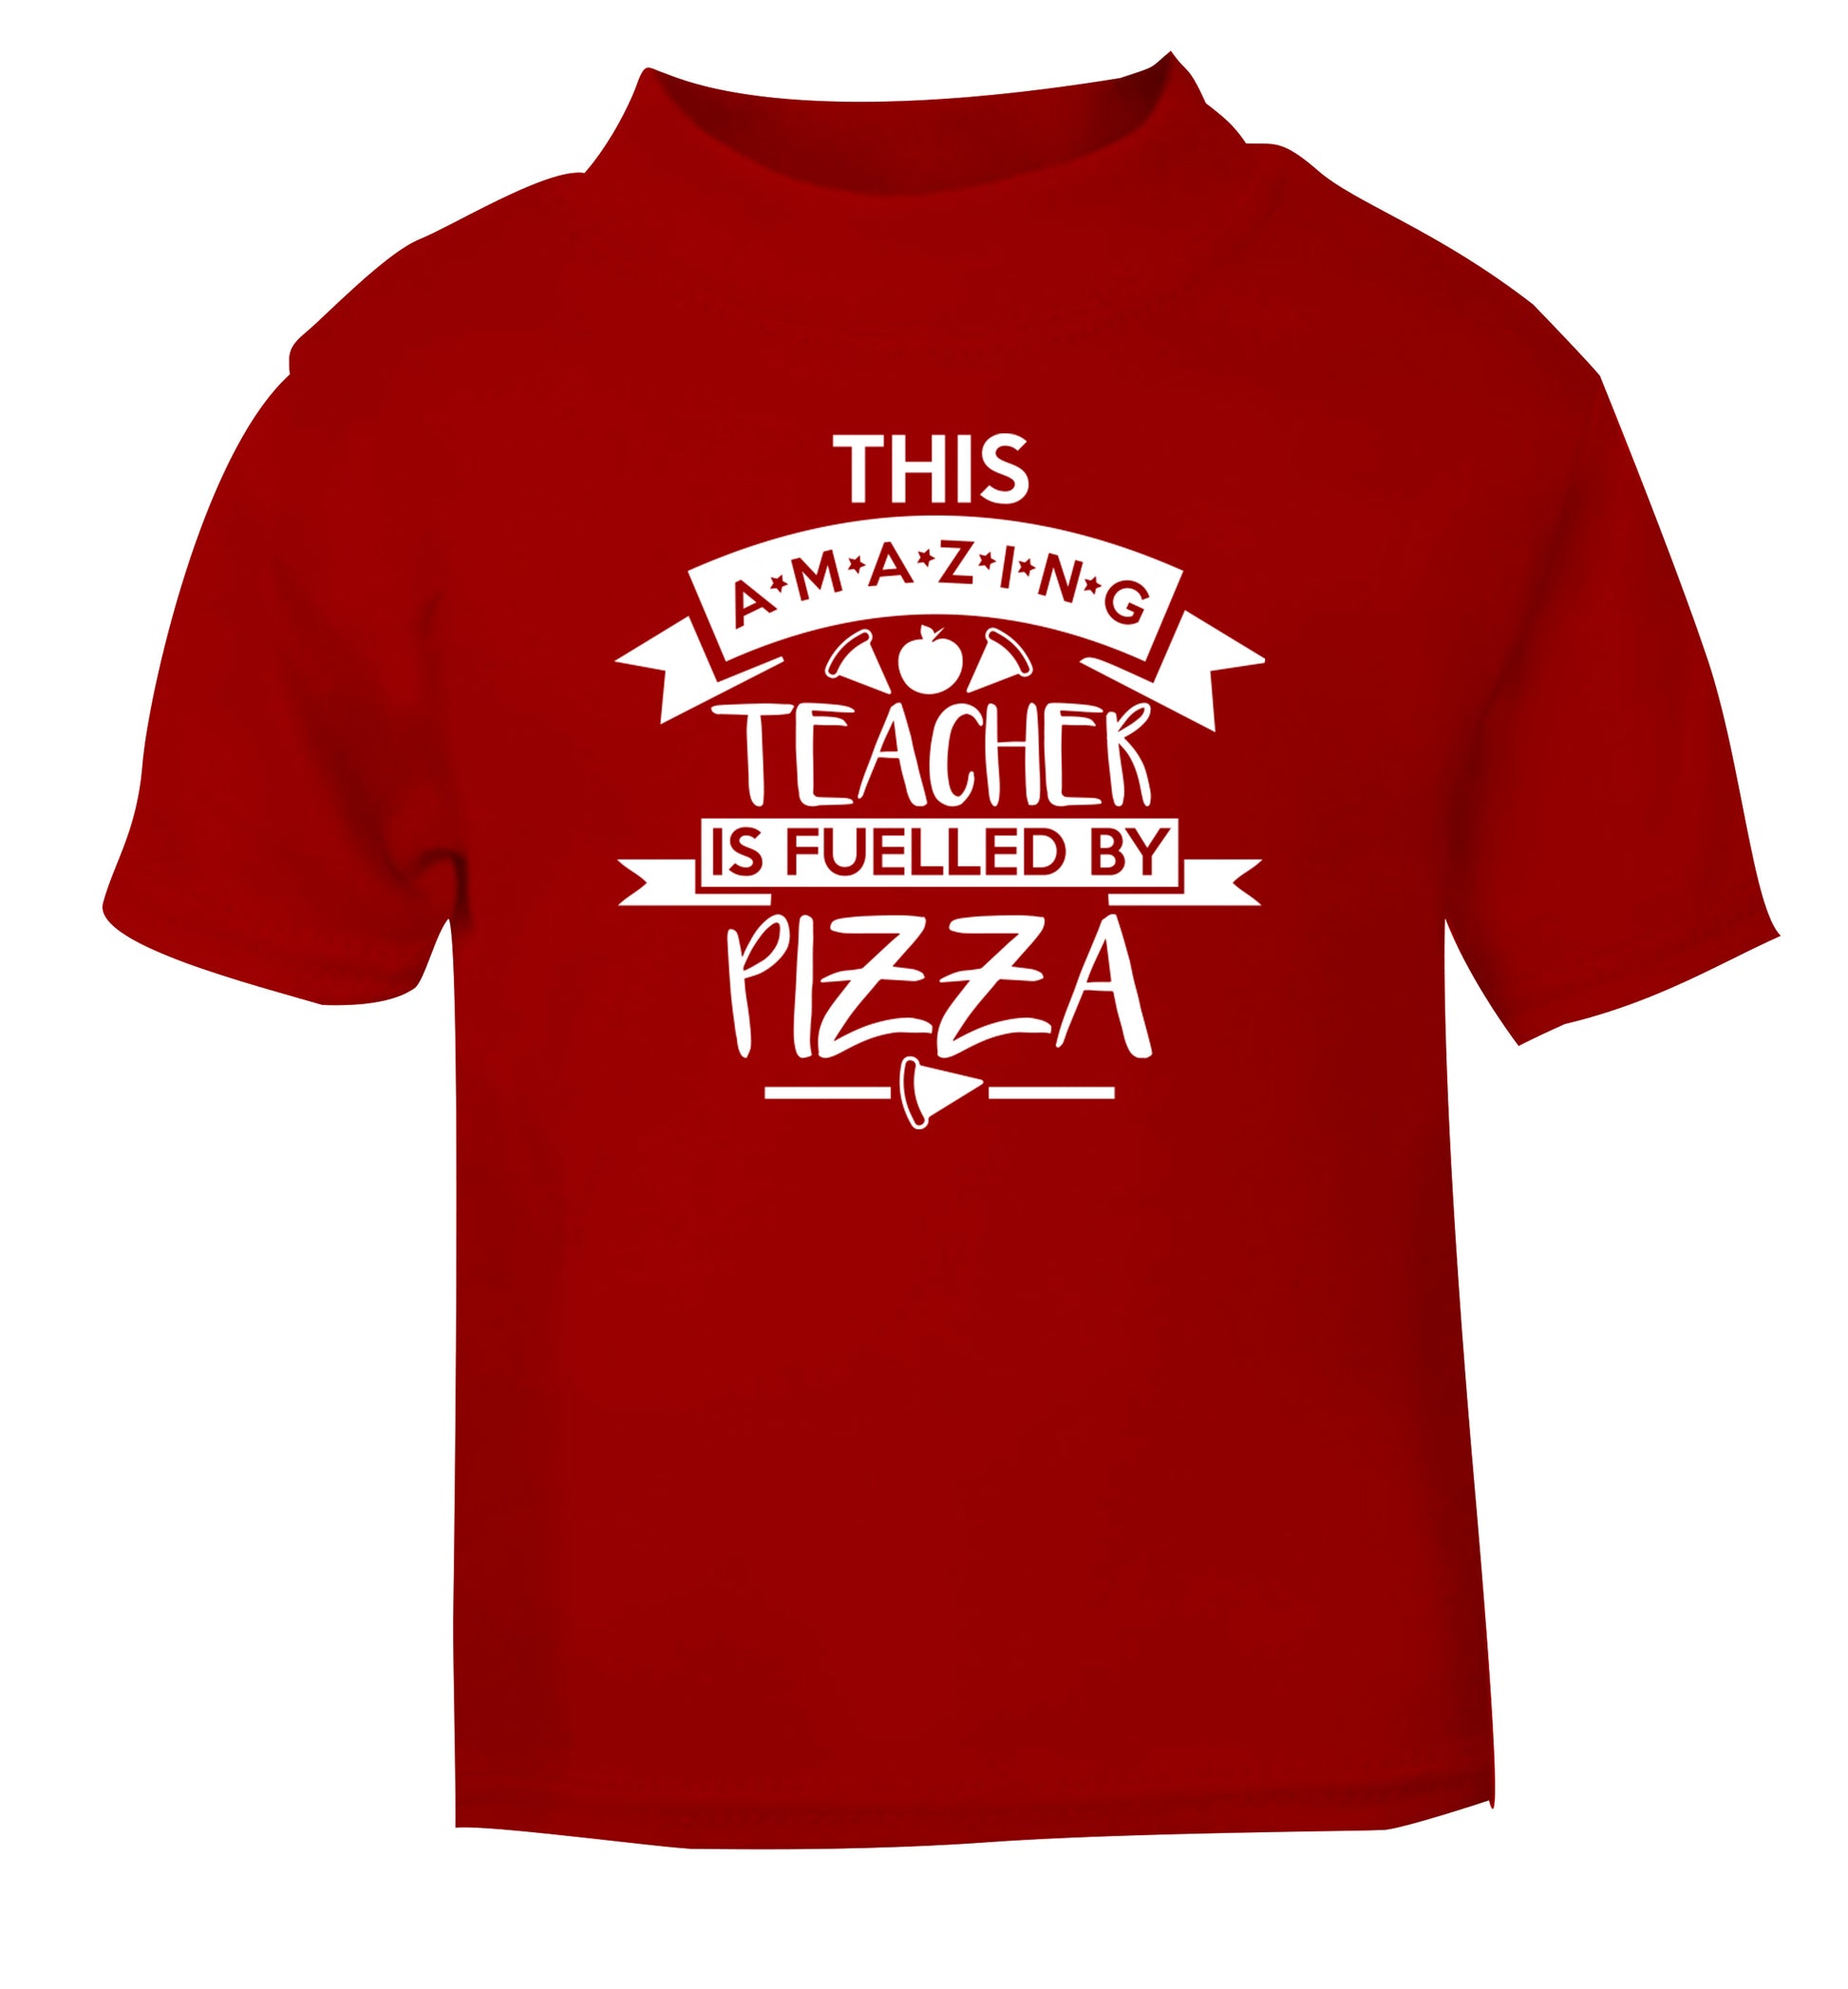 This amazing teacher is fuelled by pizza red Baby Toddler Tshirt 2 Years